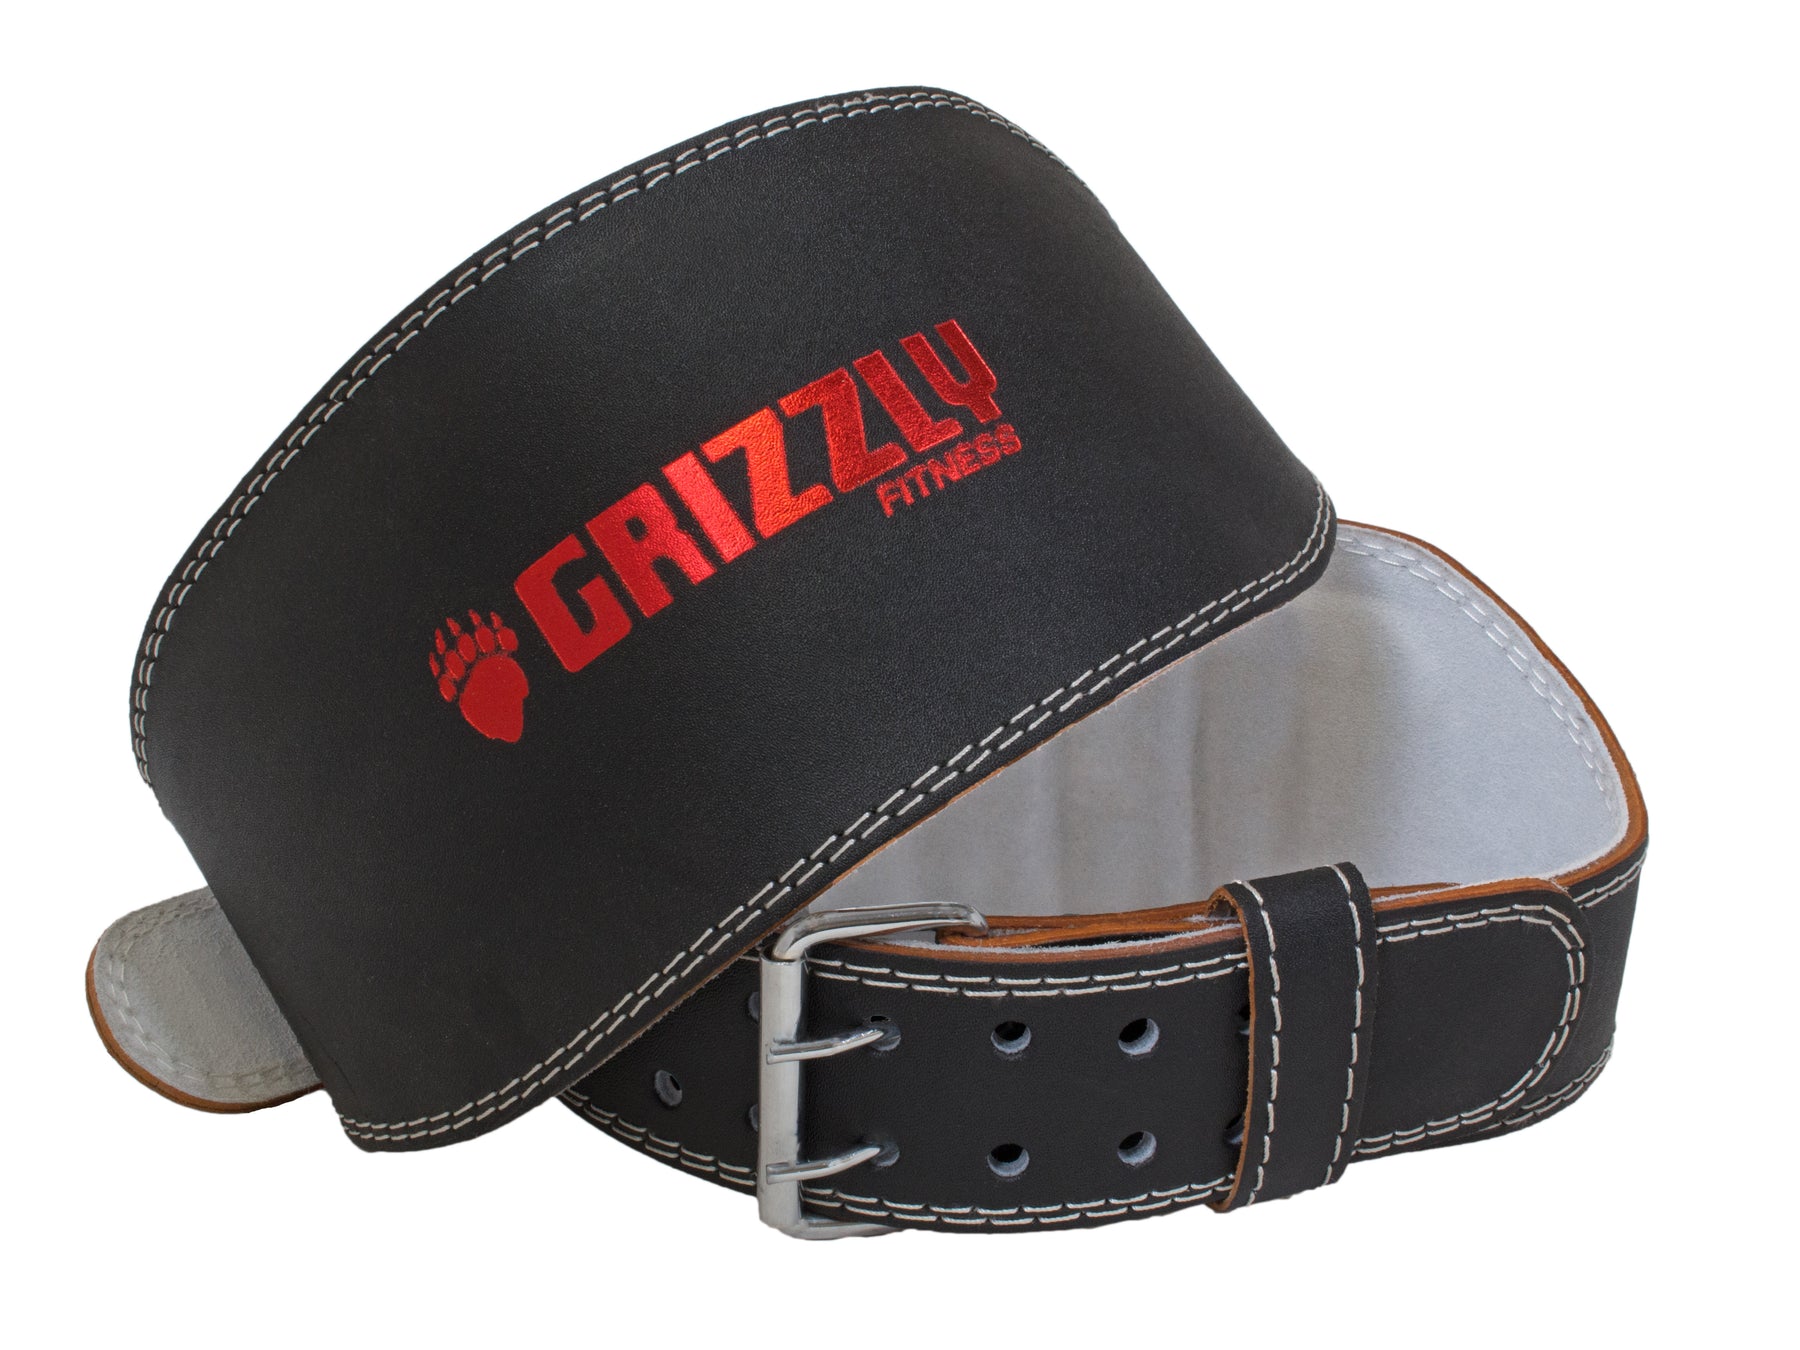 The Grizzly Leather Belt